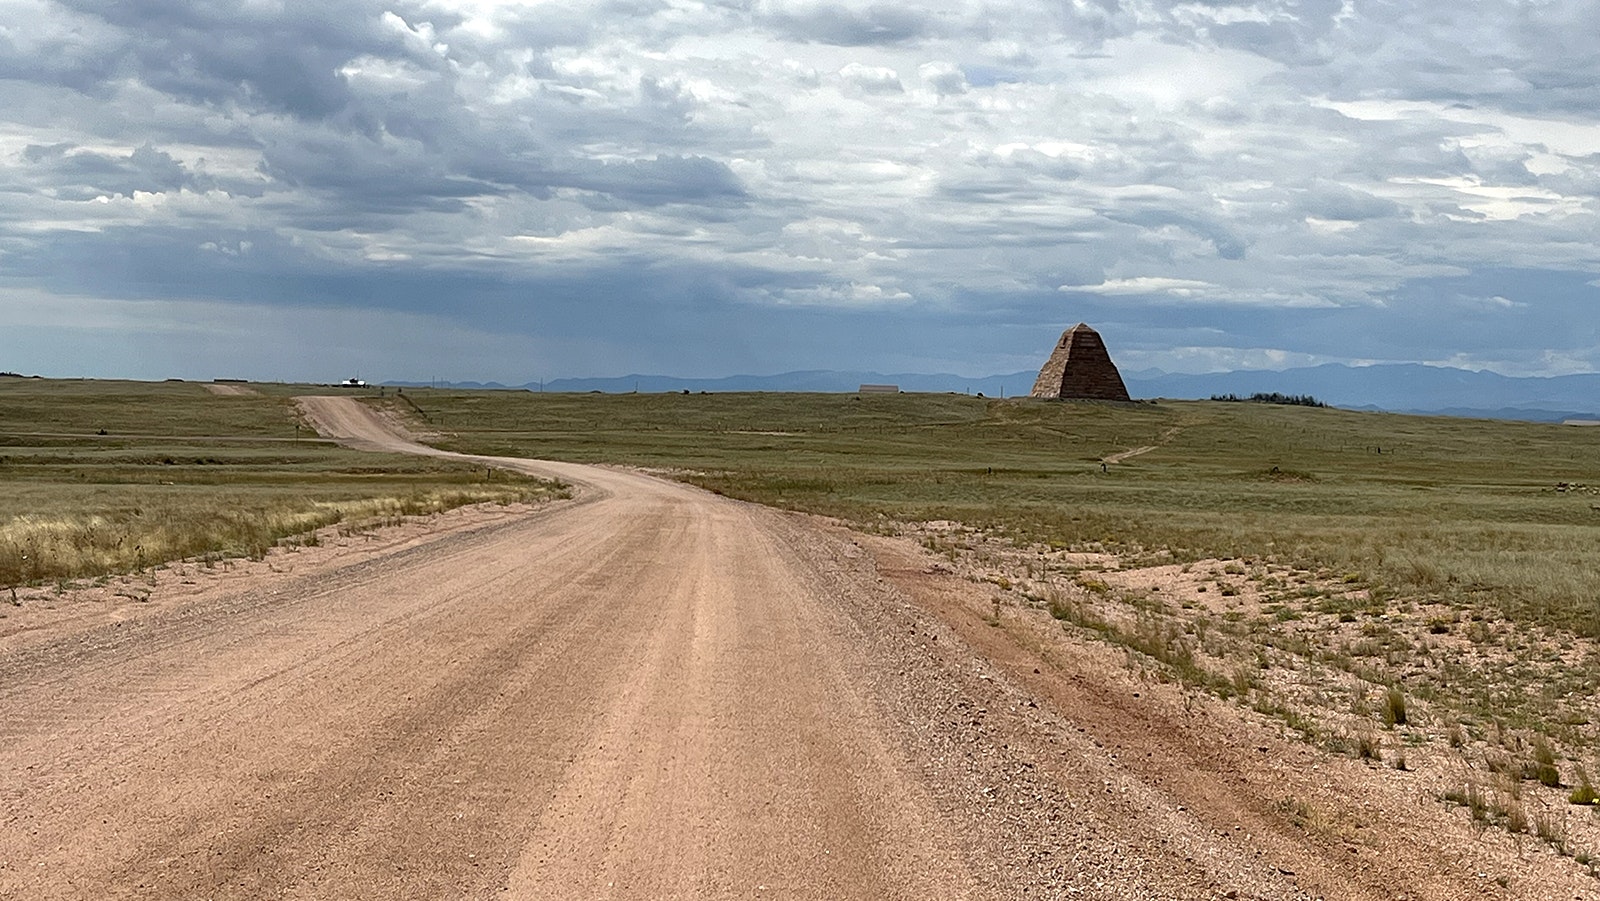 Approaching the Ames Monument in southern Wyoming.